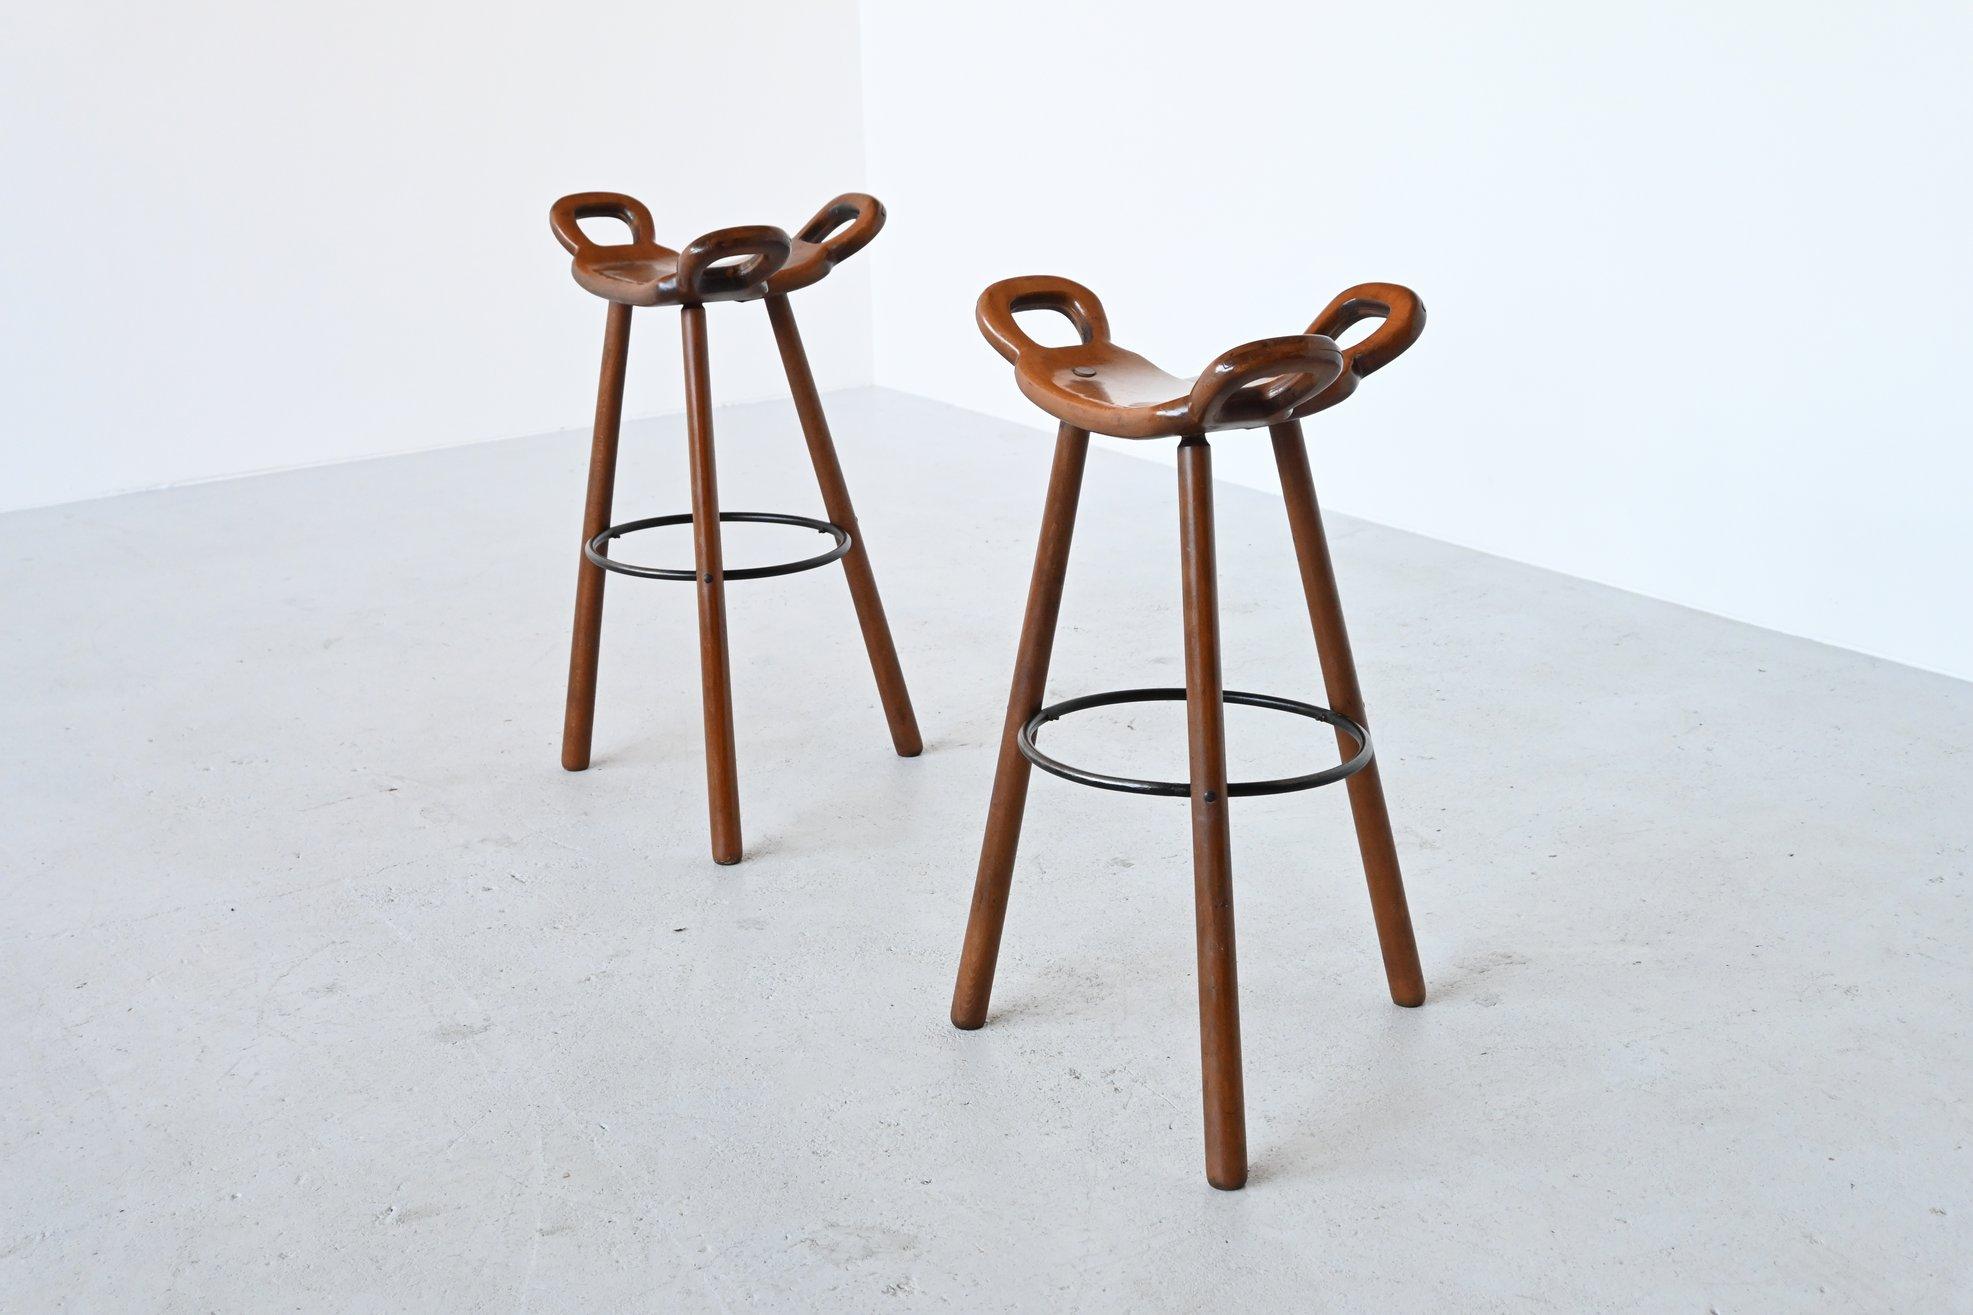 Fantastic pair Brutalist Marbella bar stools manufactured by Confonorm, Spain, 1970. These stools are made of dark stained solid beechwood and they have a solid metal foot rest ring to put your feet on and strengthen the construction. The T-shaped